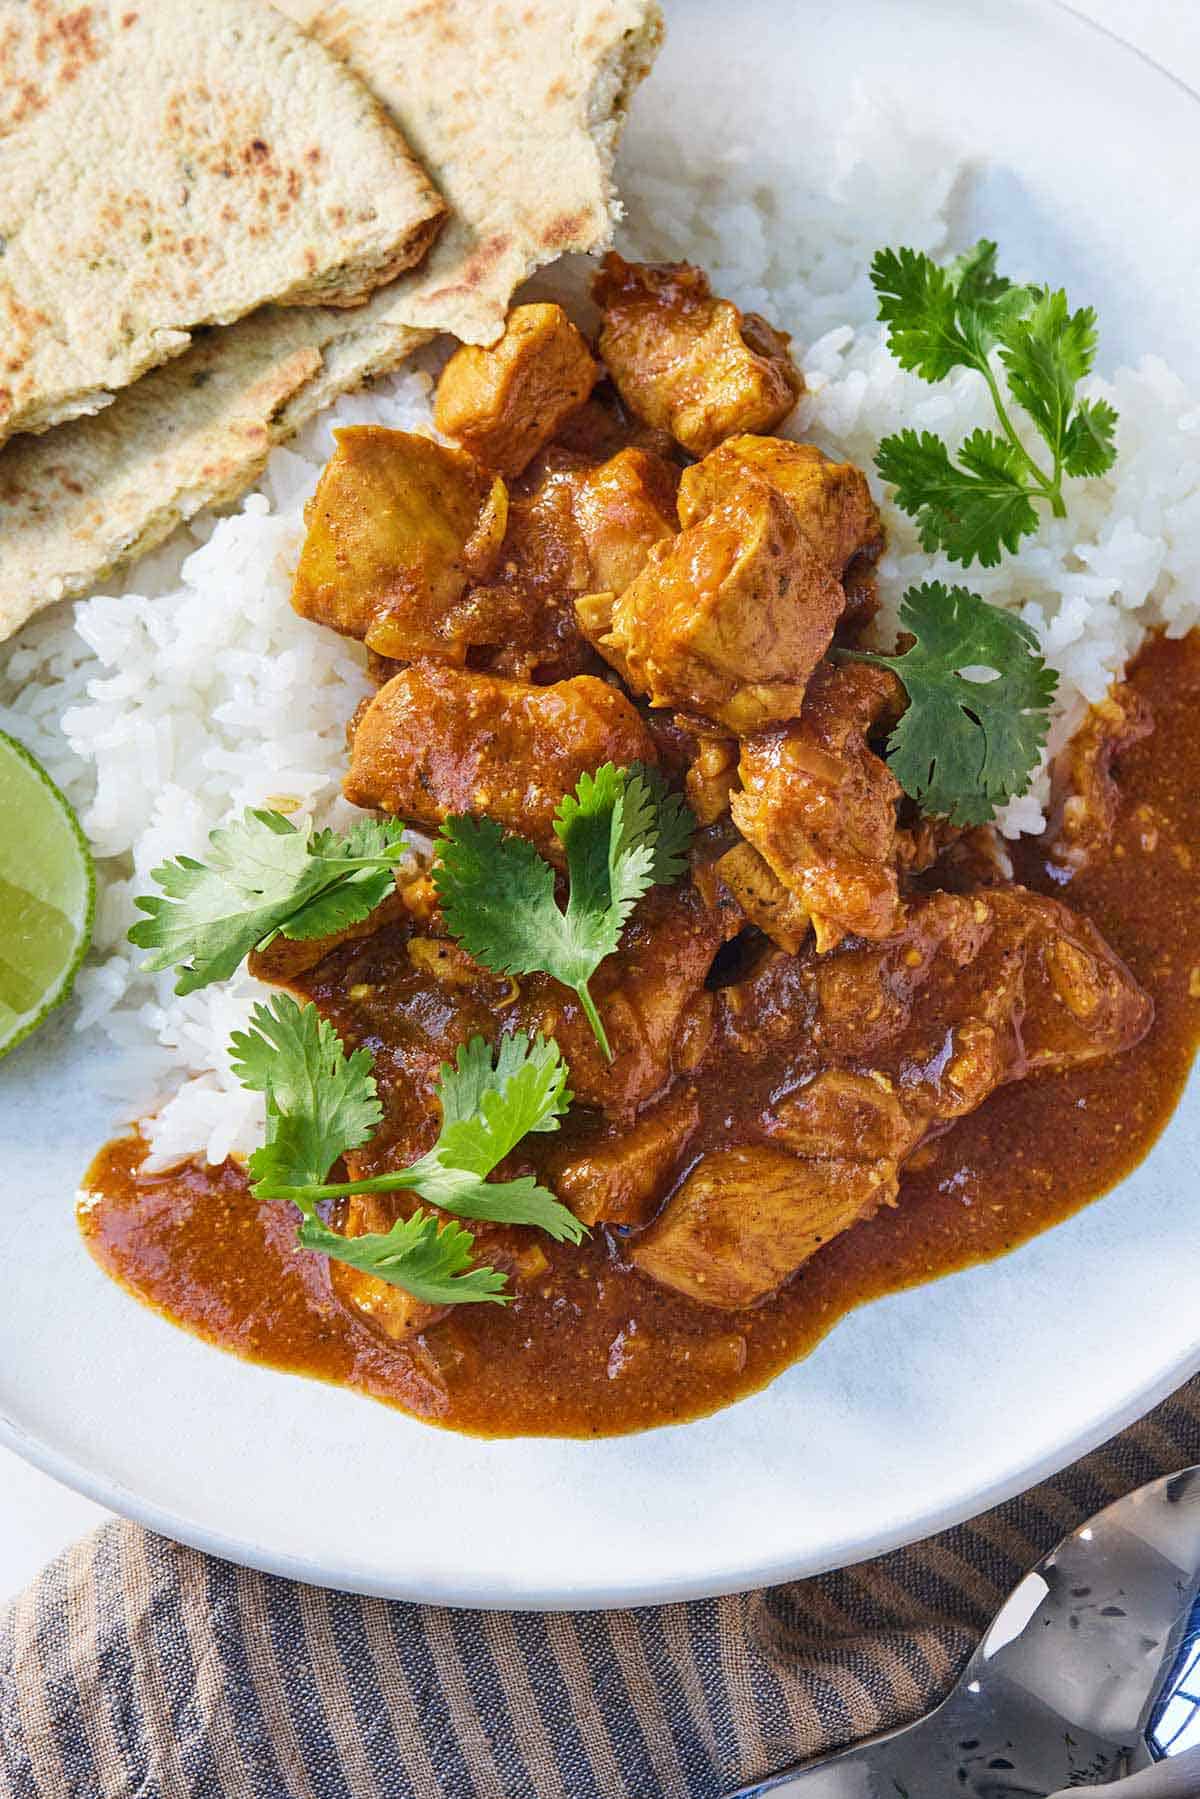 A plate of Instant Pot chicken tikka masala with rice and naan.